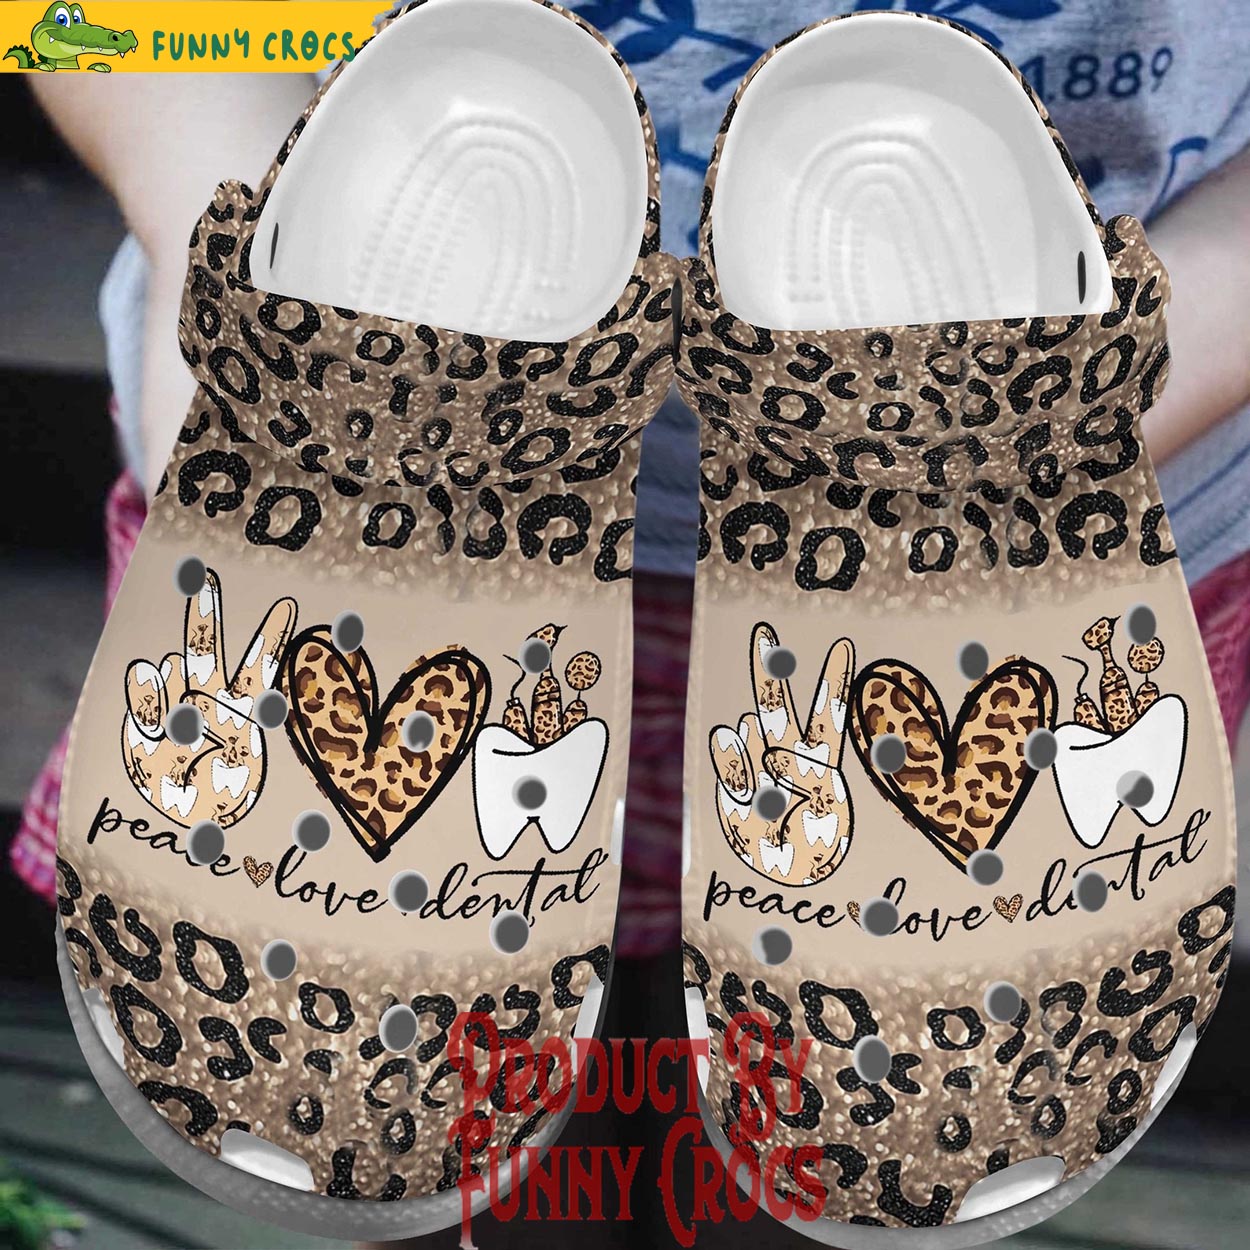 Peace Love Dentist Crocs - Discover Comfort And Style Clog Shoes With ...